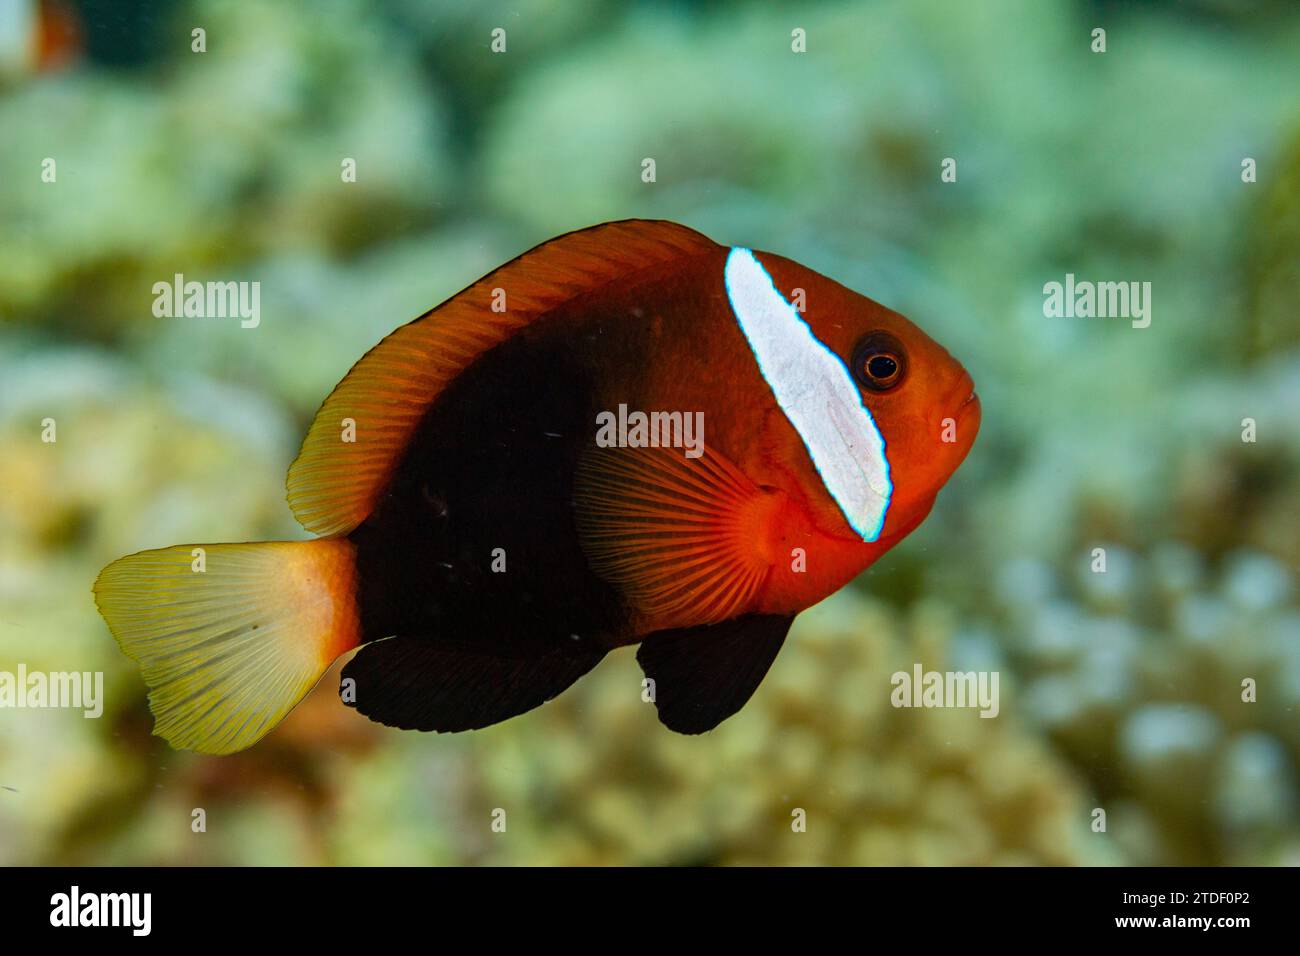 An adult blackback anemonefish (Amphiprion melanopus), swimming on the reef off Bangka Island, Indonesia, Southeast Asia Stock Photo